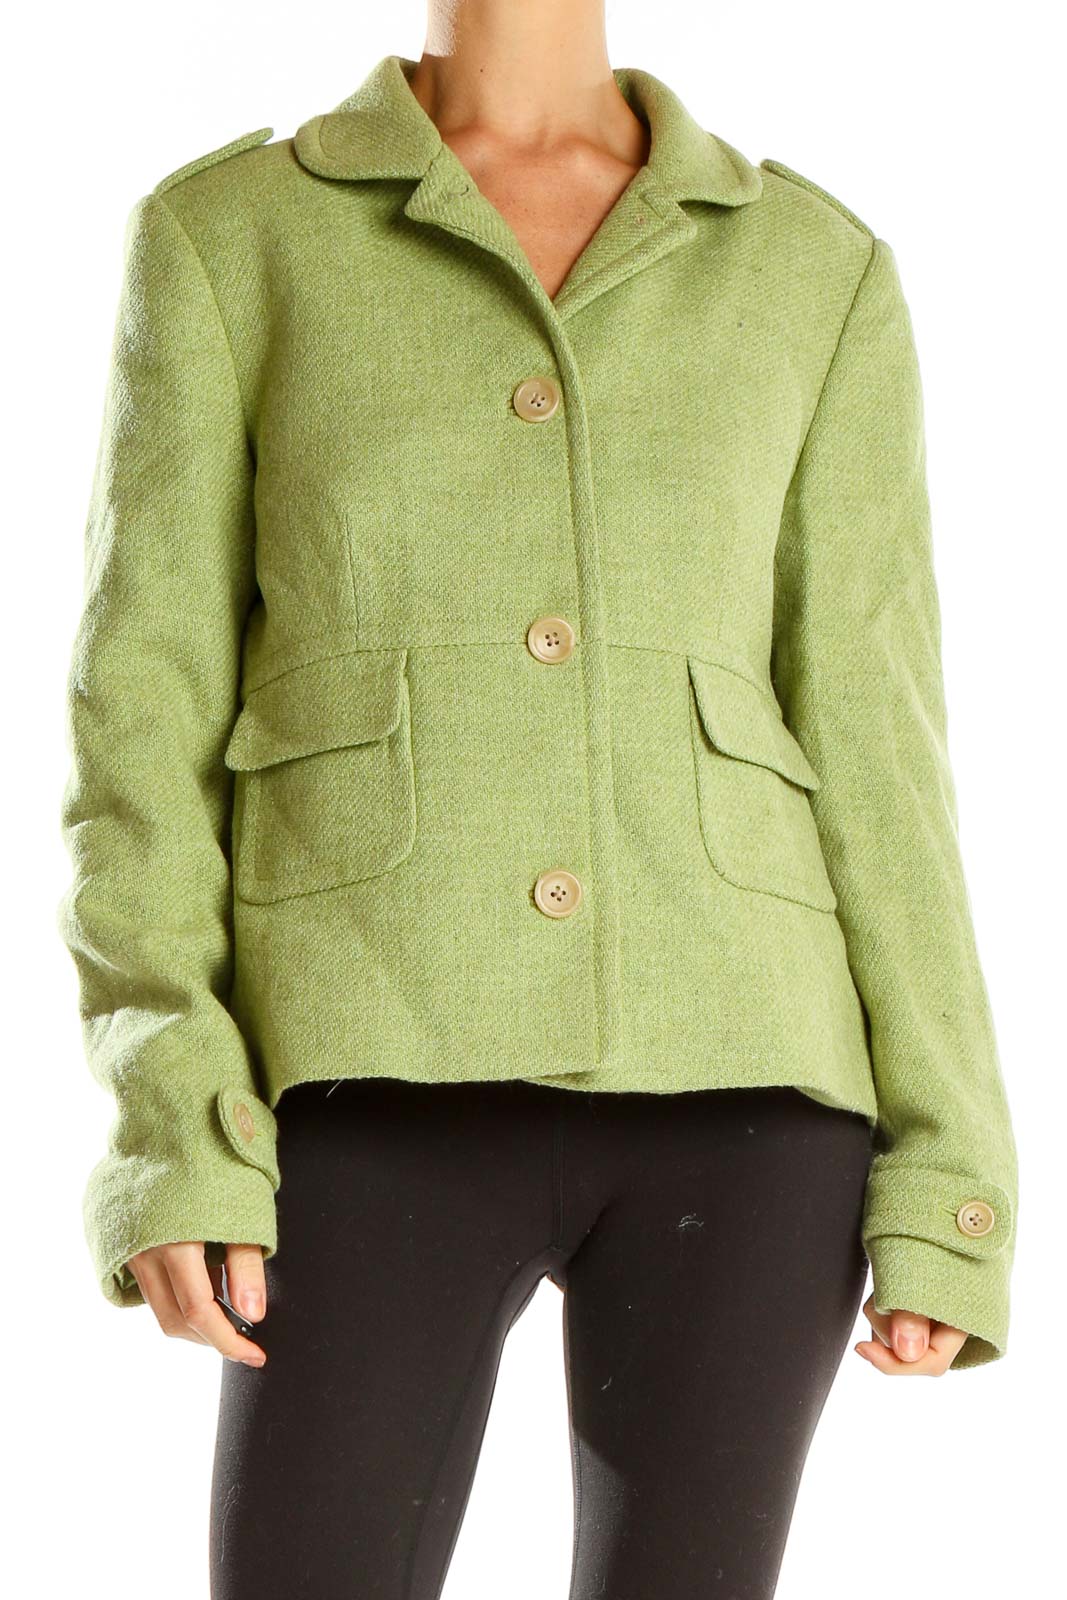 Green Knit Jacket Front